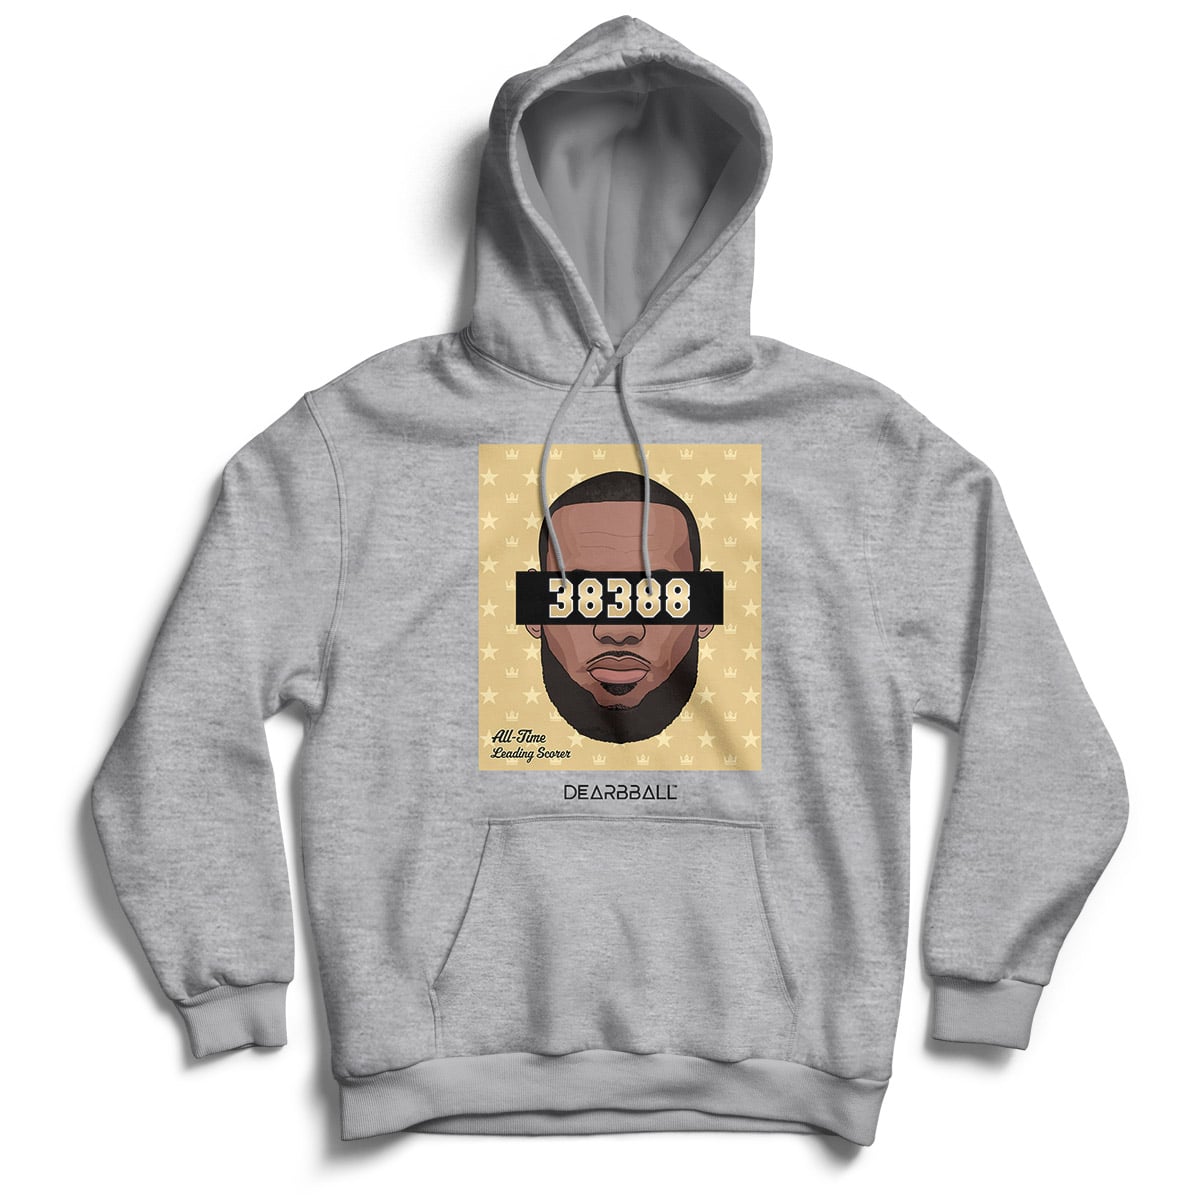 [ENFANT] DearBBall Sweat à Capuche - King Record 38388 Edition